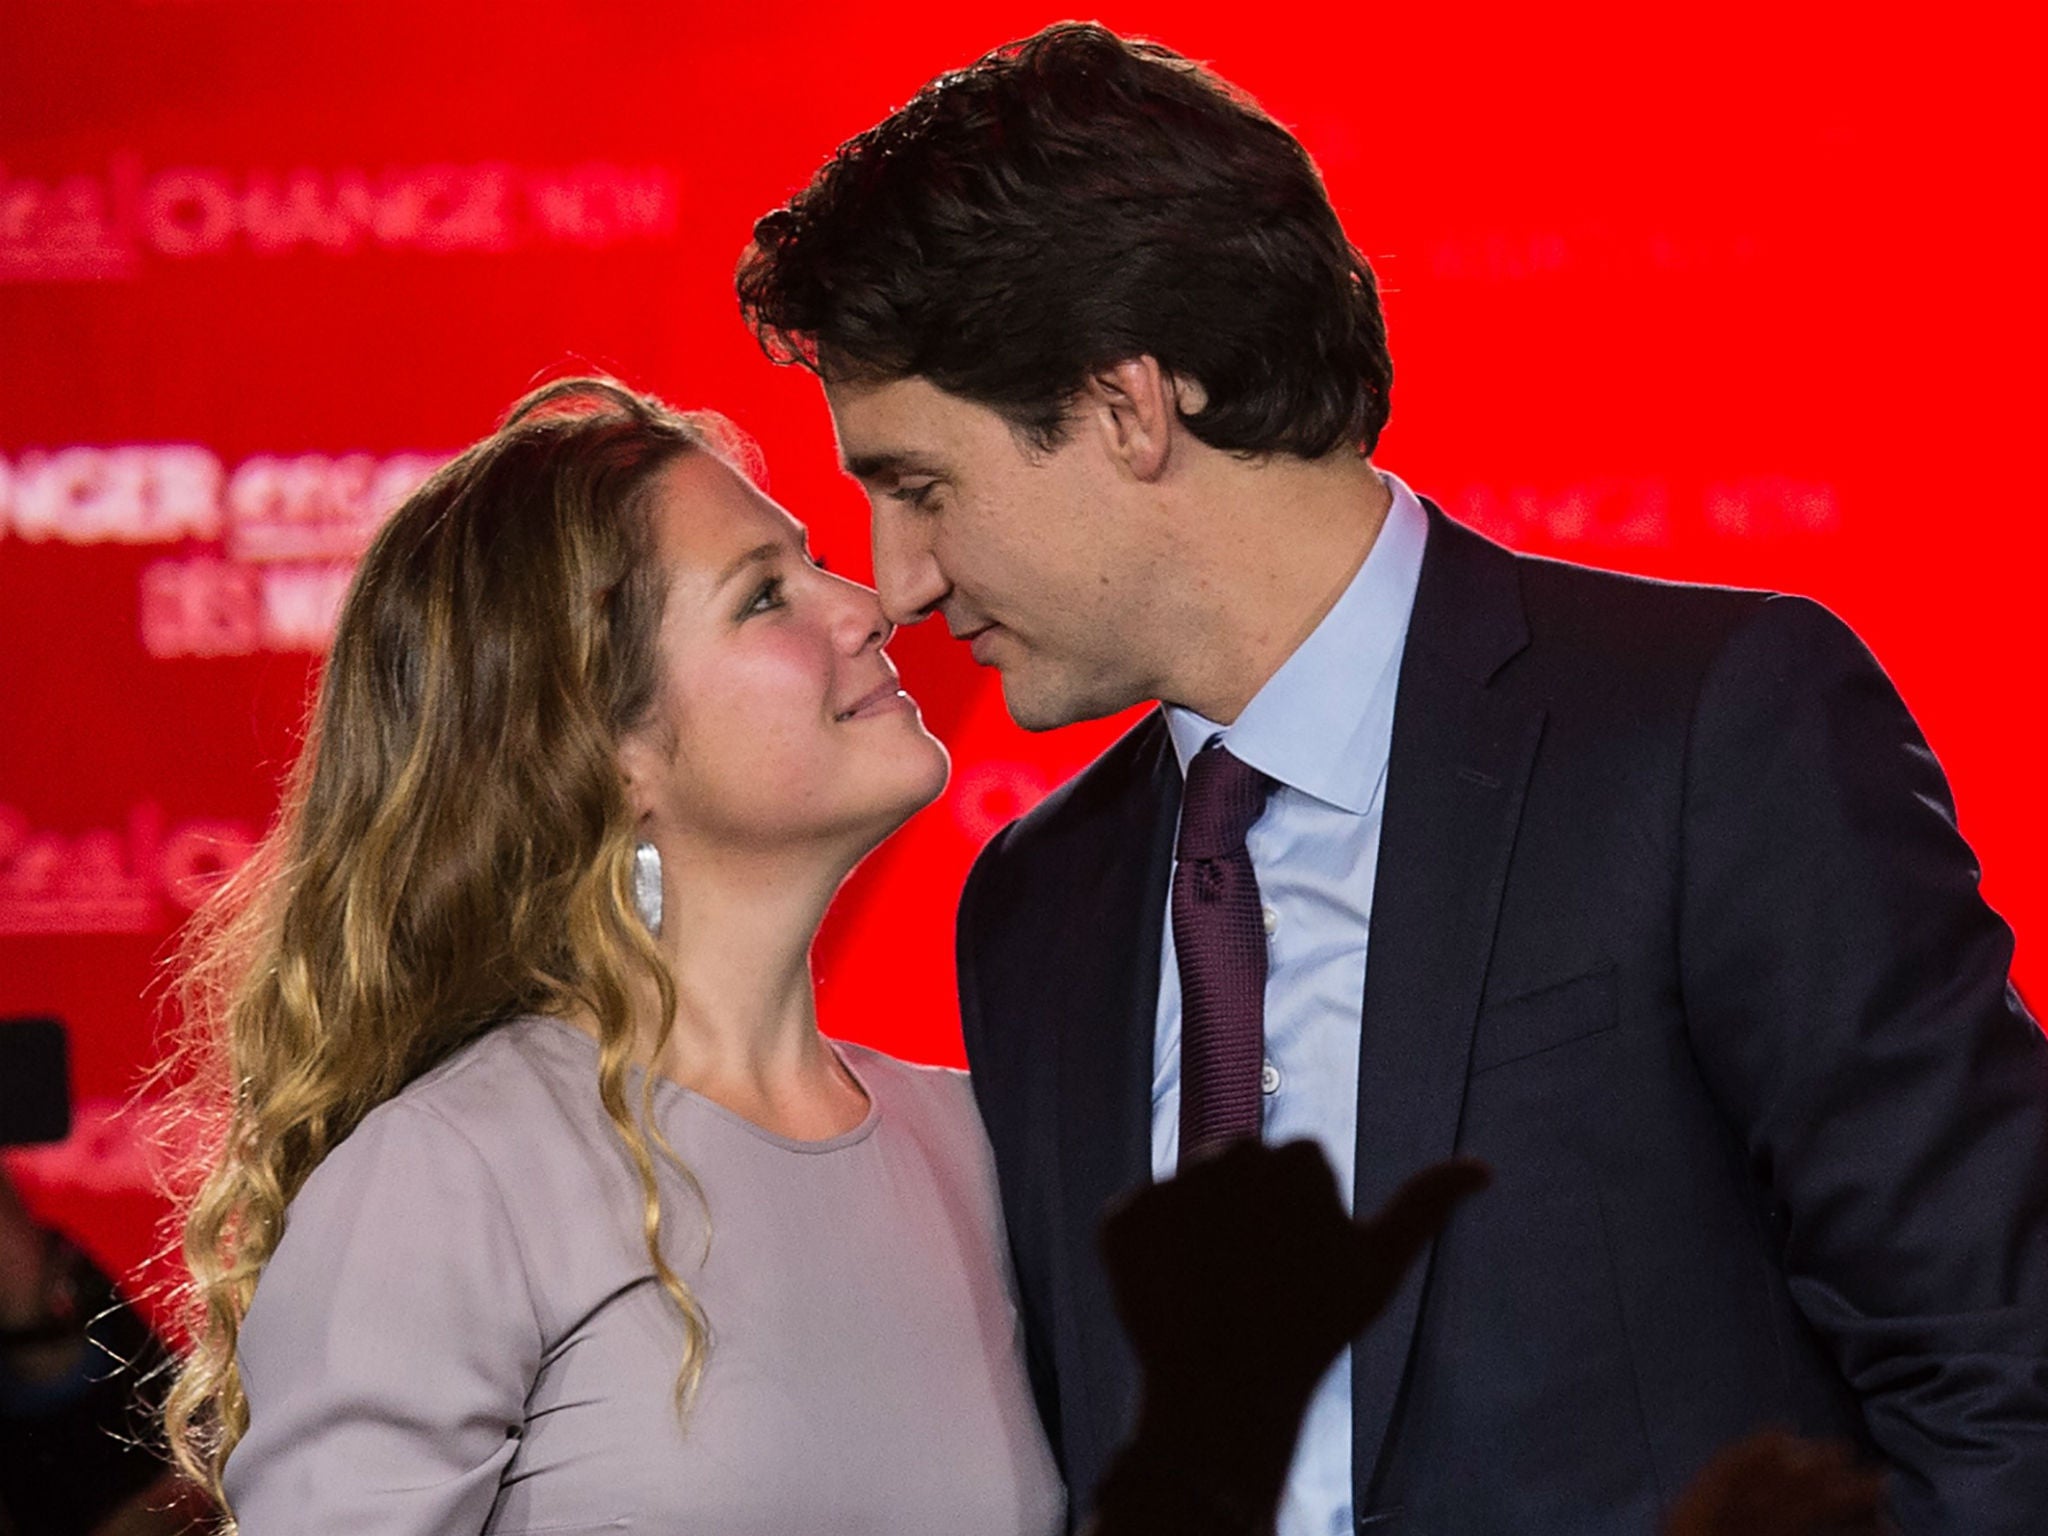 The Trudeaus